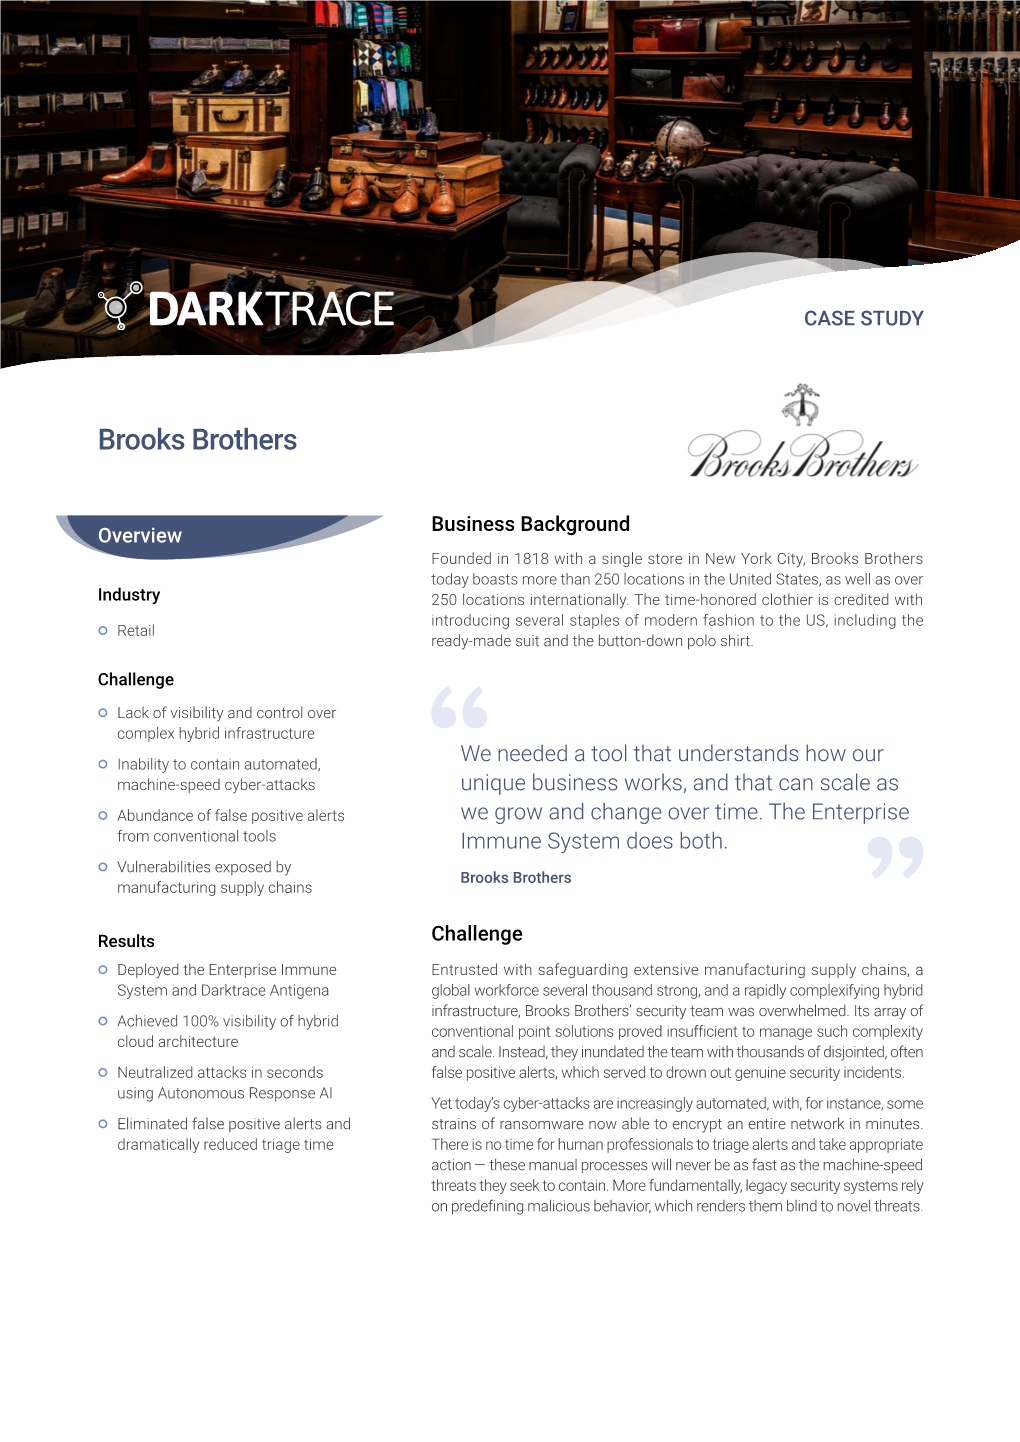 Darktrace Case Study: Brooks Brothers, Leading Clothing Retailer